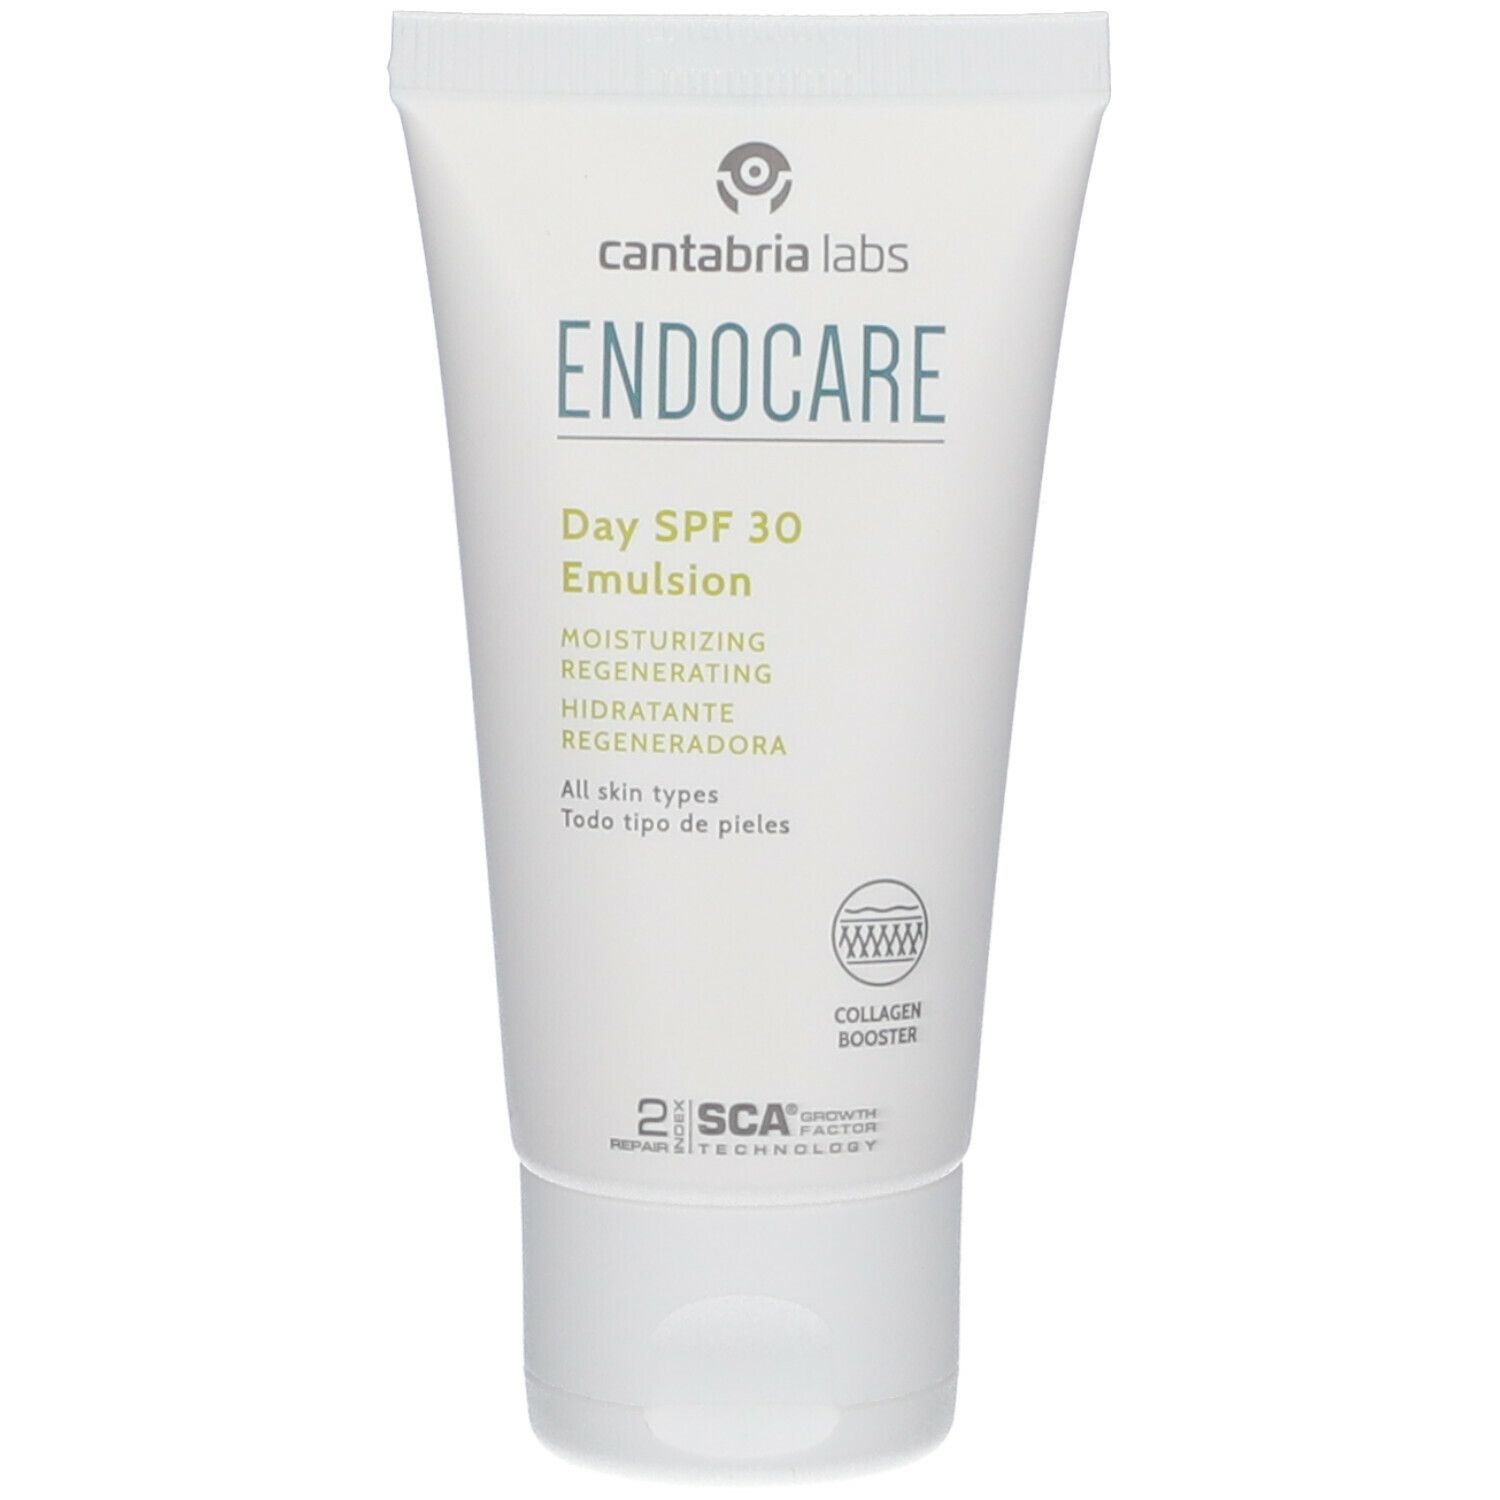 Cantabria Labs Endocare Day SPF 30